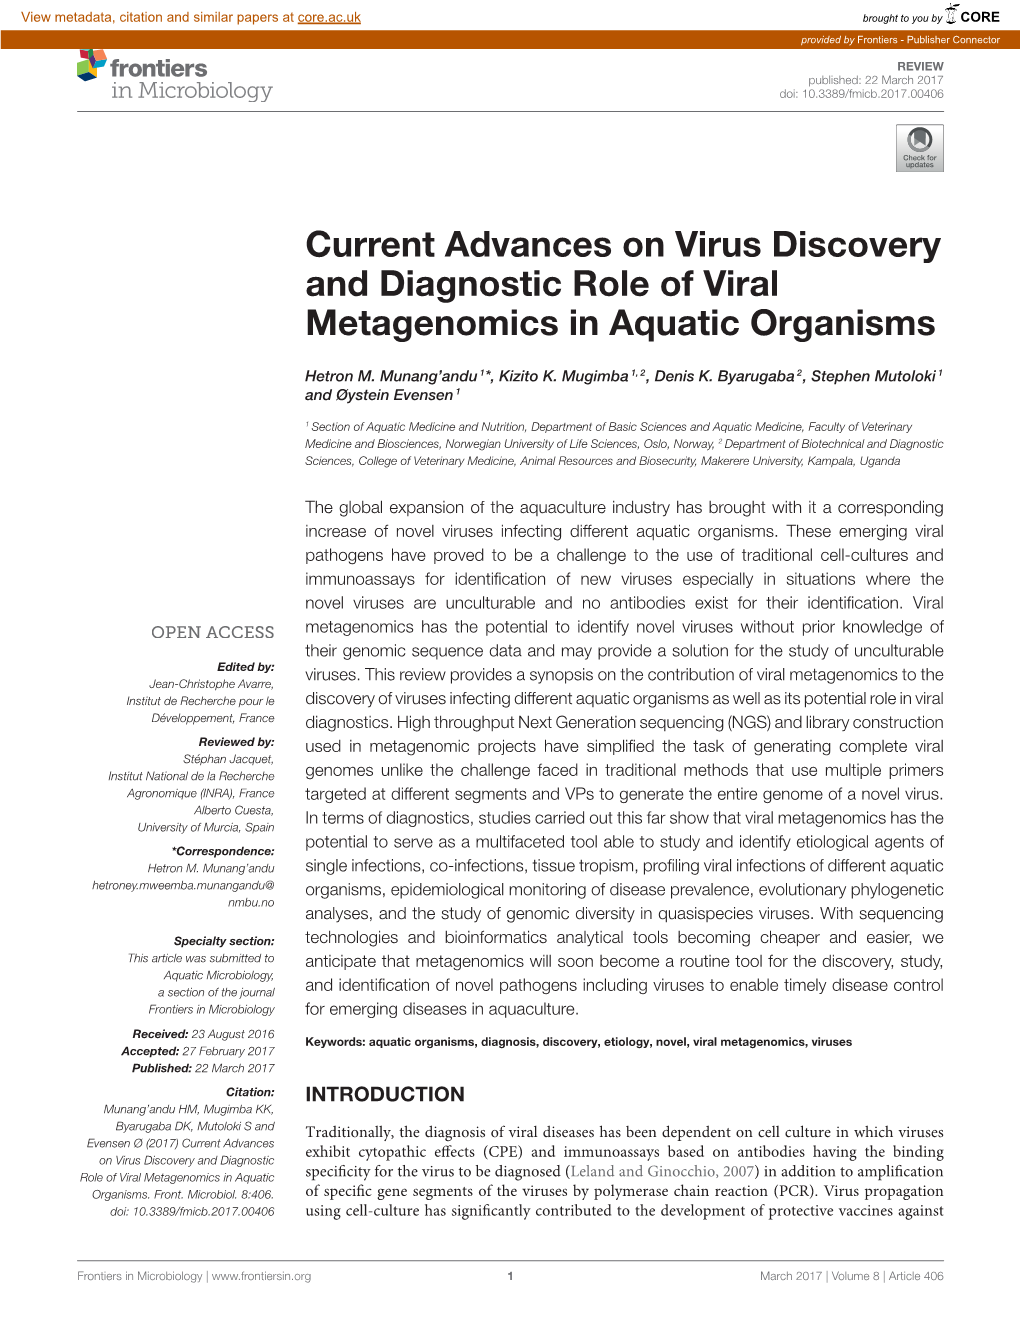 Current Advances on Virus Discovery and Diagnostic Role of Viral Metagenomics in Aquatic Organisms